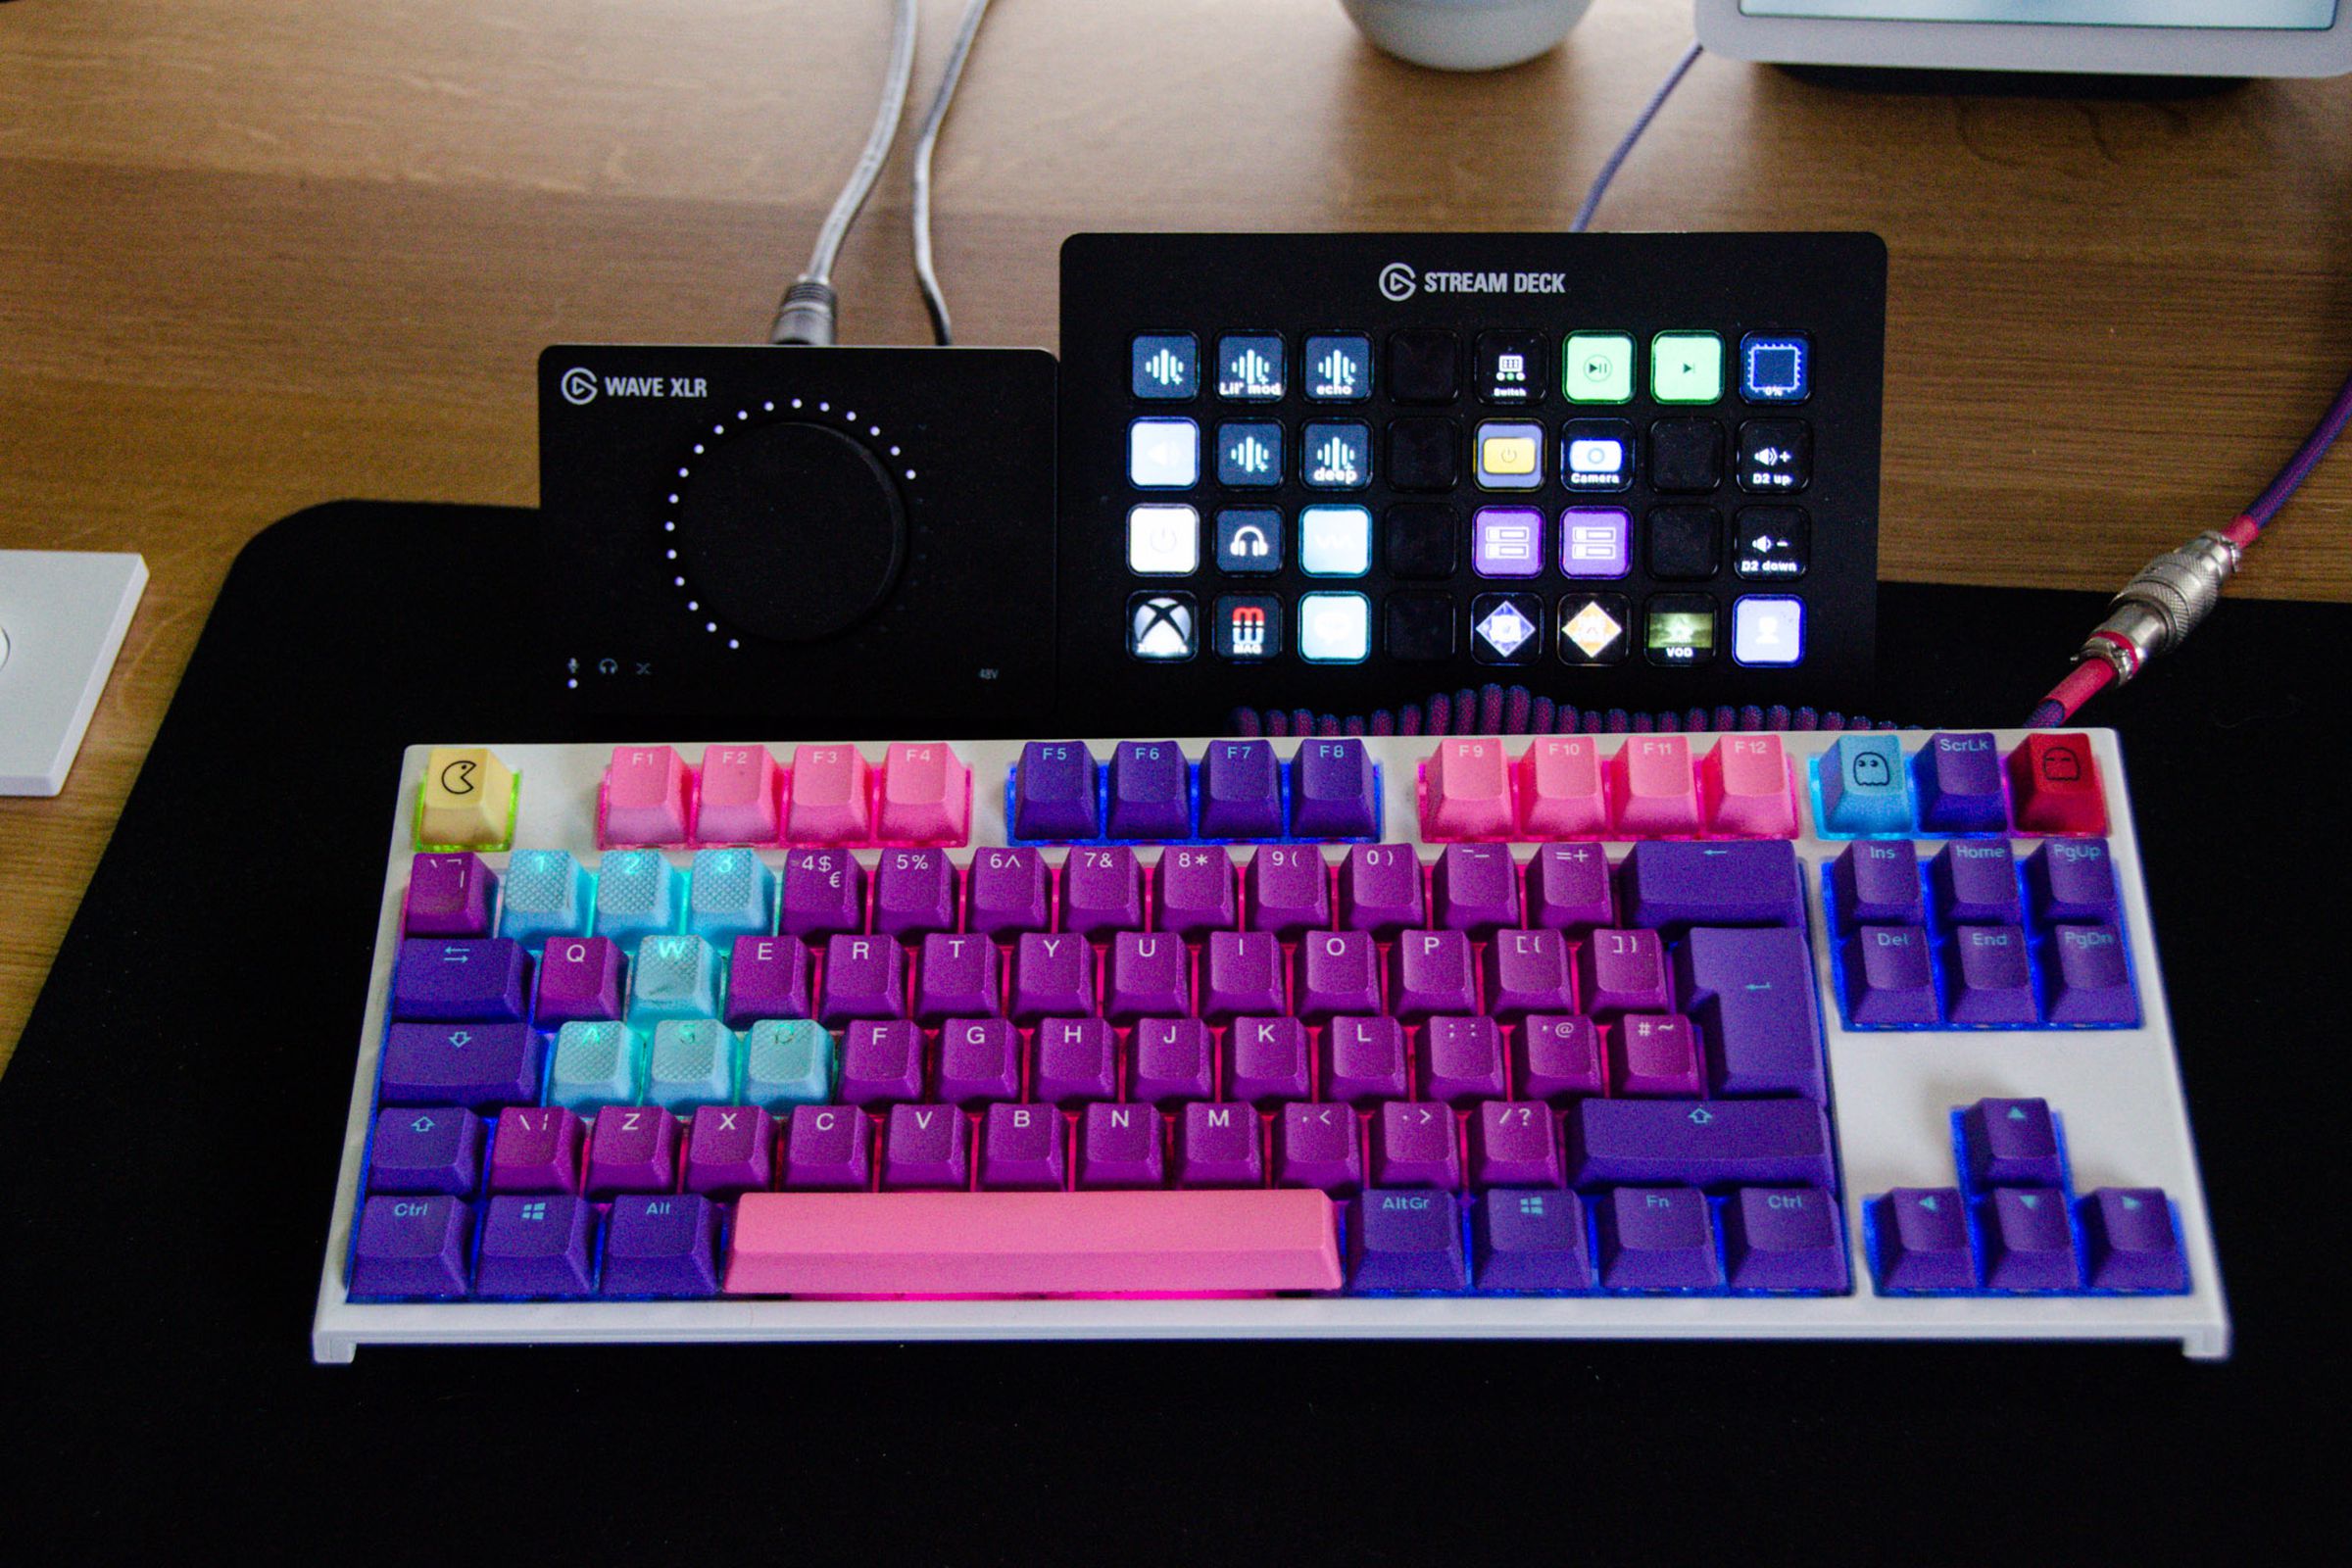 A colorful gaming keyboard, behind it is a volume switch and a Stream Deck button console.